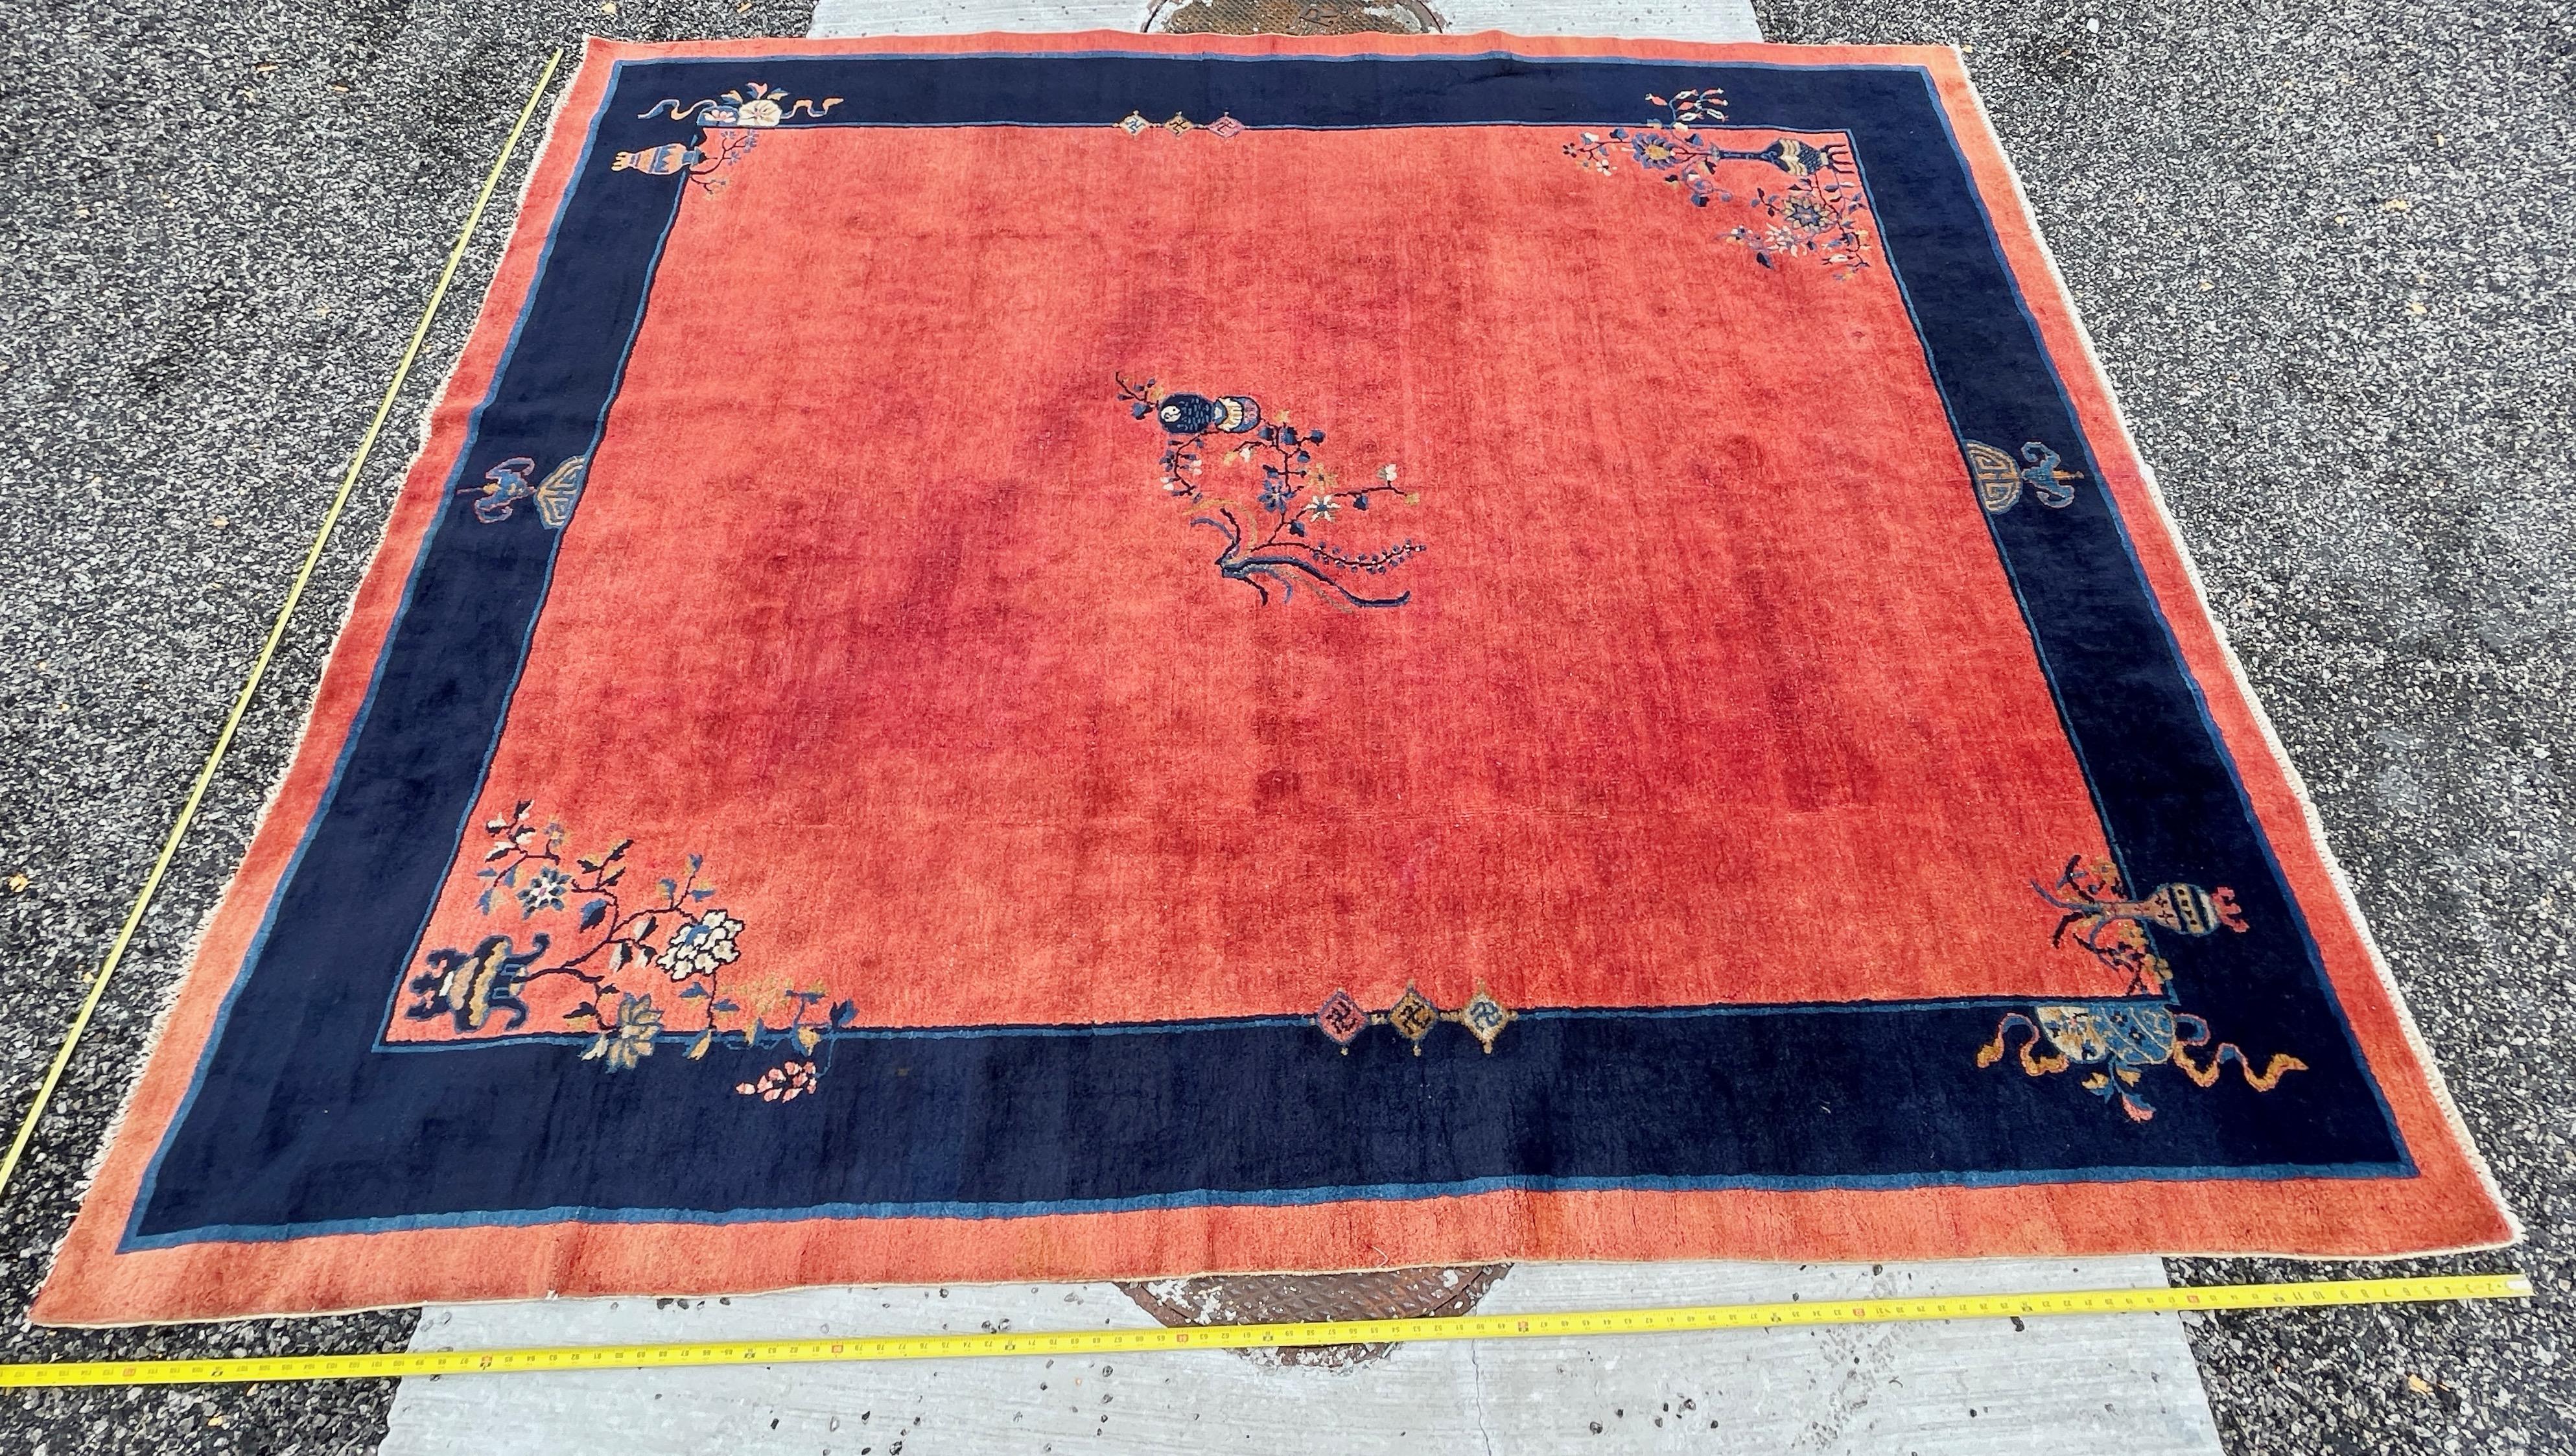 Hand-Knotted 1920's Chinese Art Deco Rug - 8' x 9'9